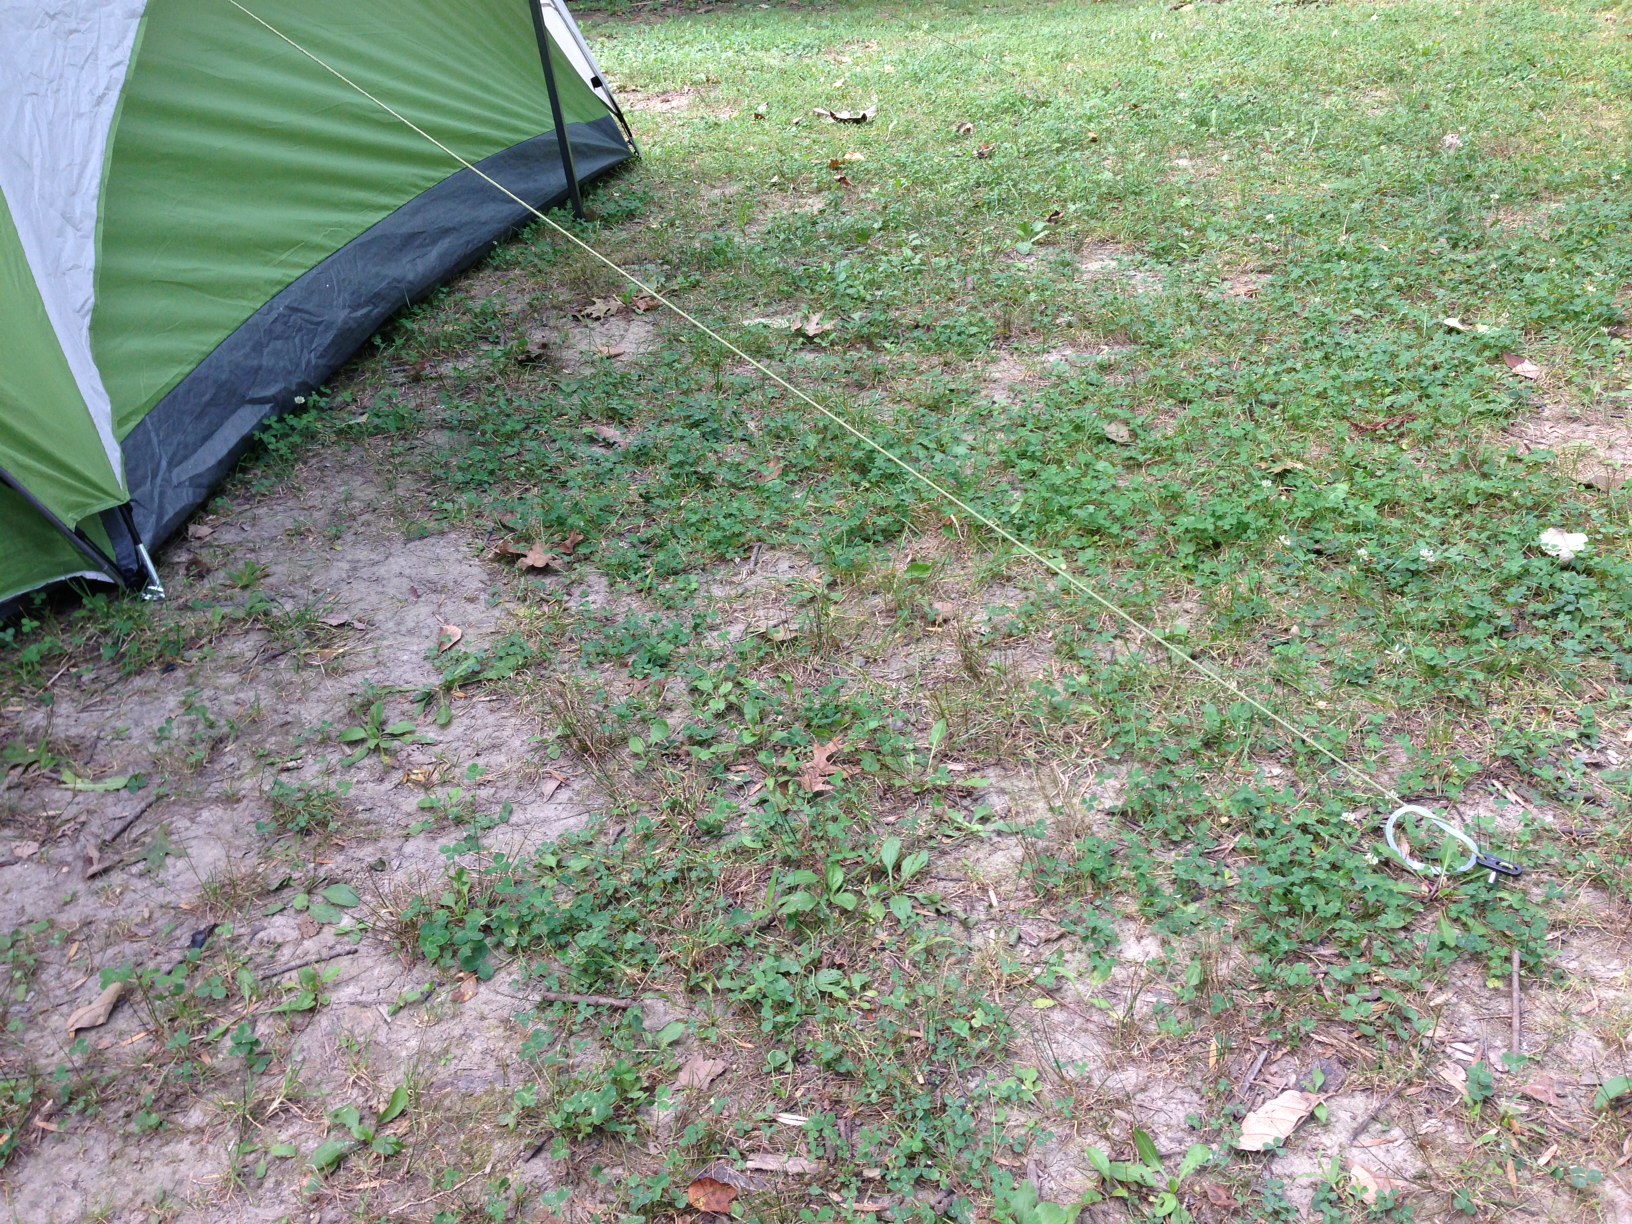 there is a tent pitched in the grass by it